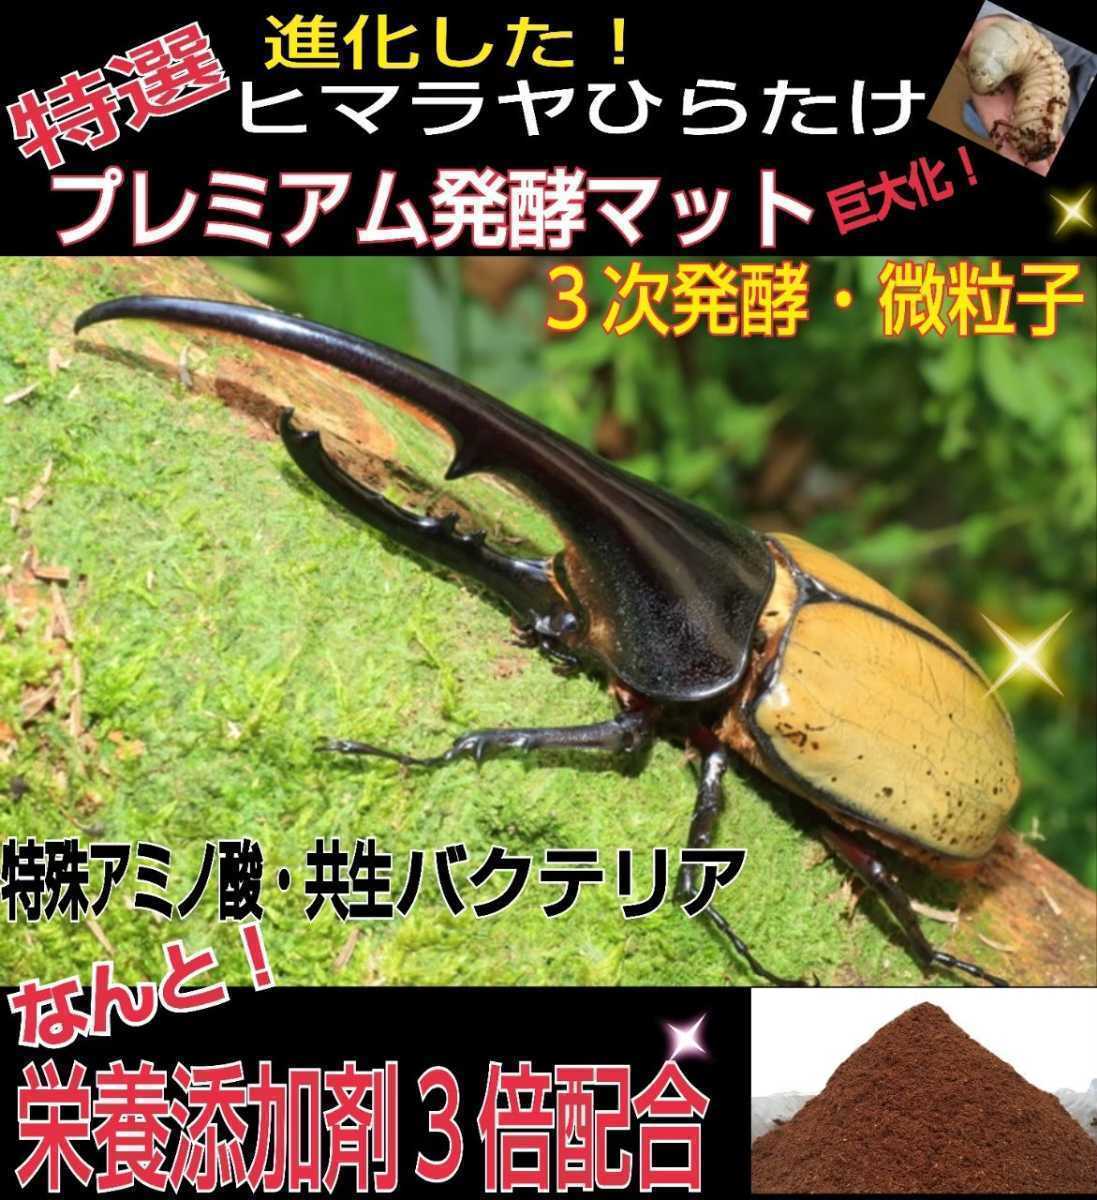  extra-large in the case! premium departure . mat * larva . inserting only! convenience!... case therefore large rhinoceros beetle feather .!kobae prevention special filter attaching 